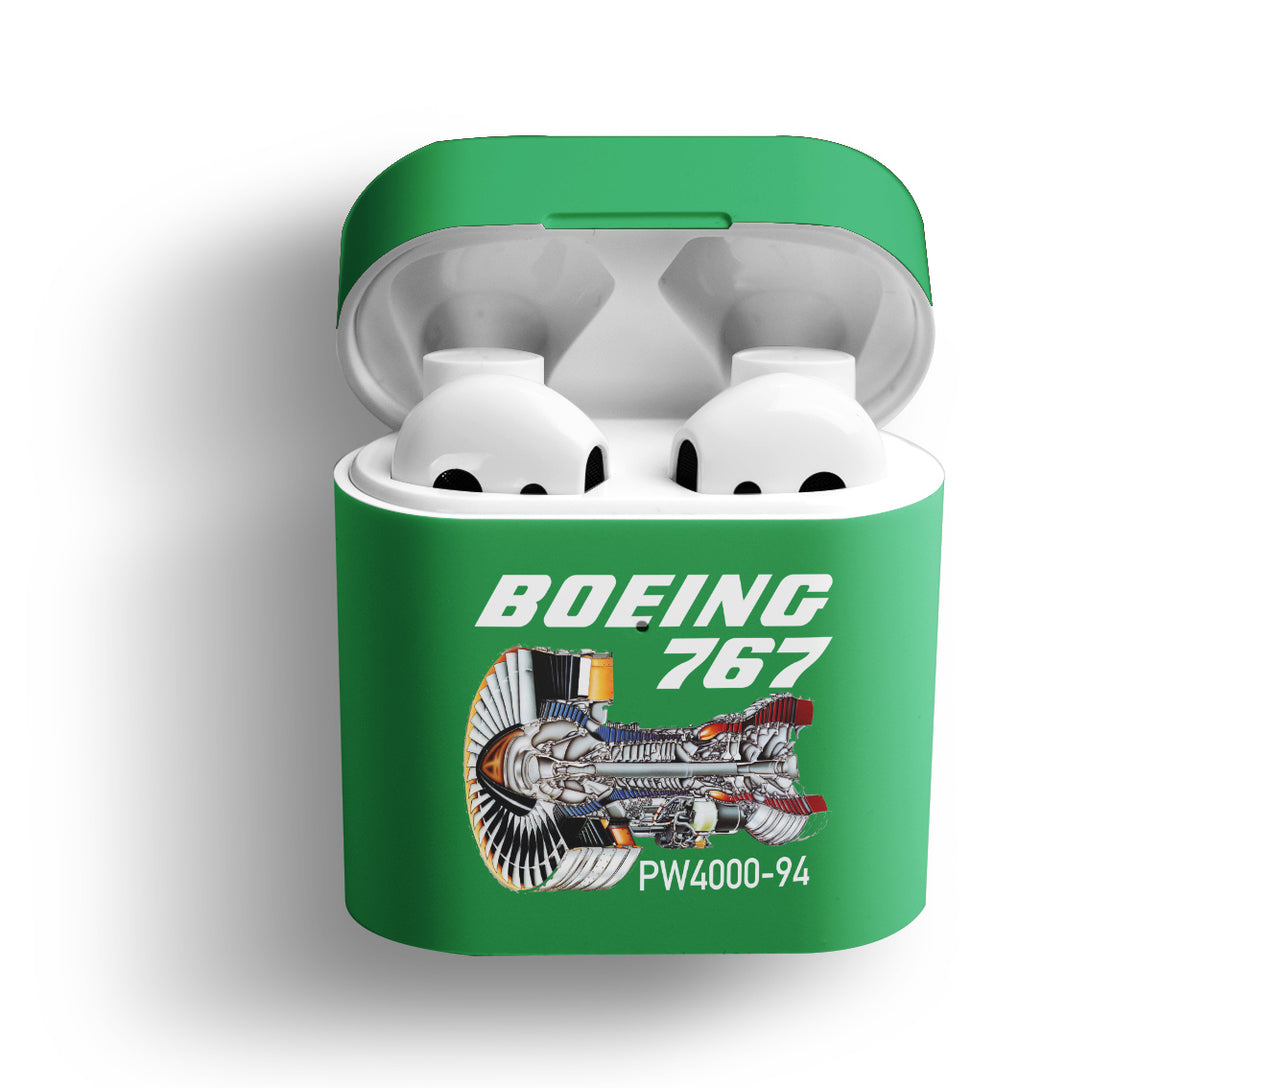 Boeing 767 Engine (PW4000-94) Designed AirPods  Cases